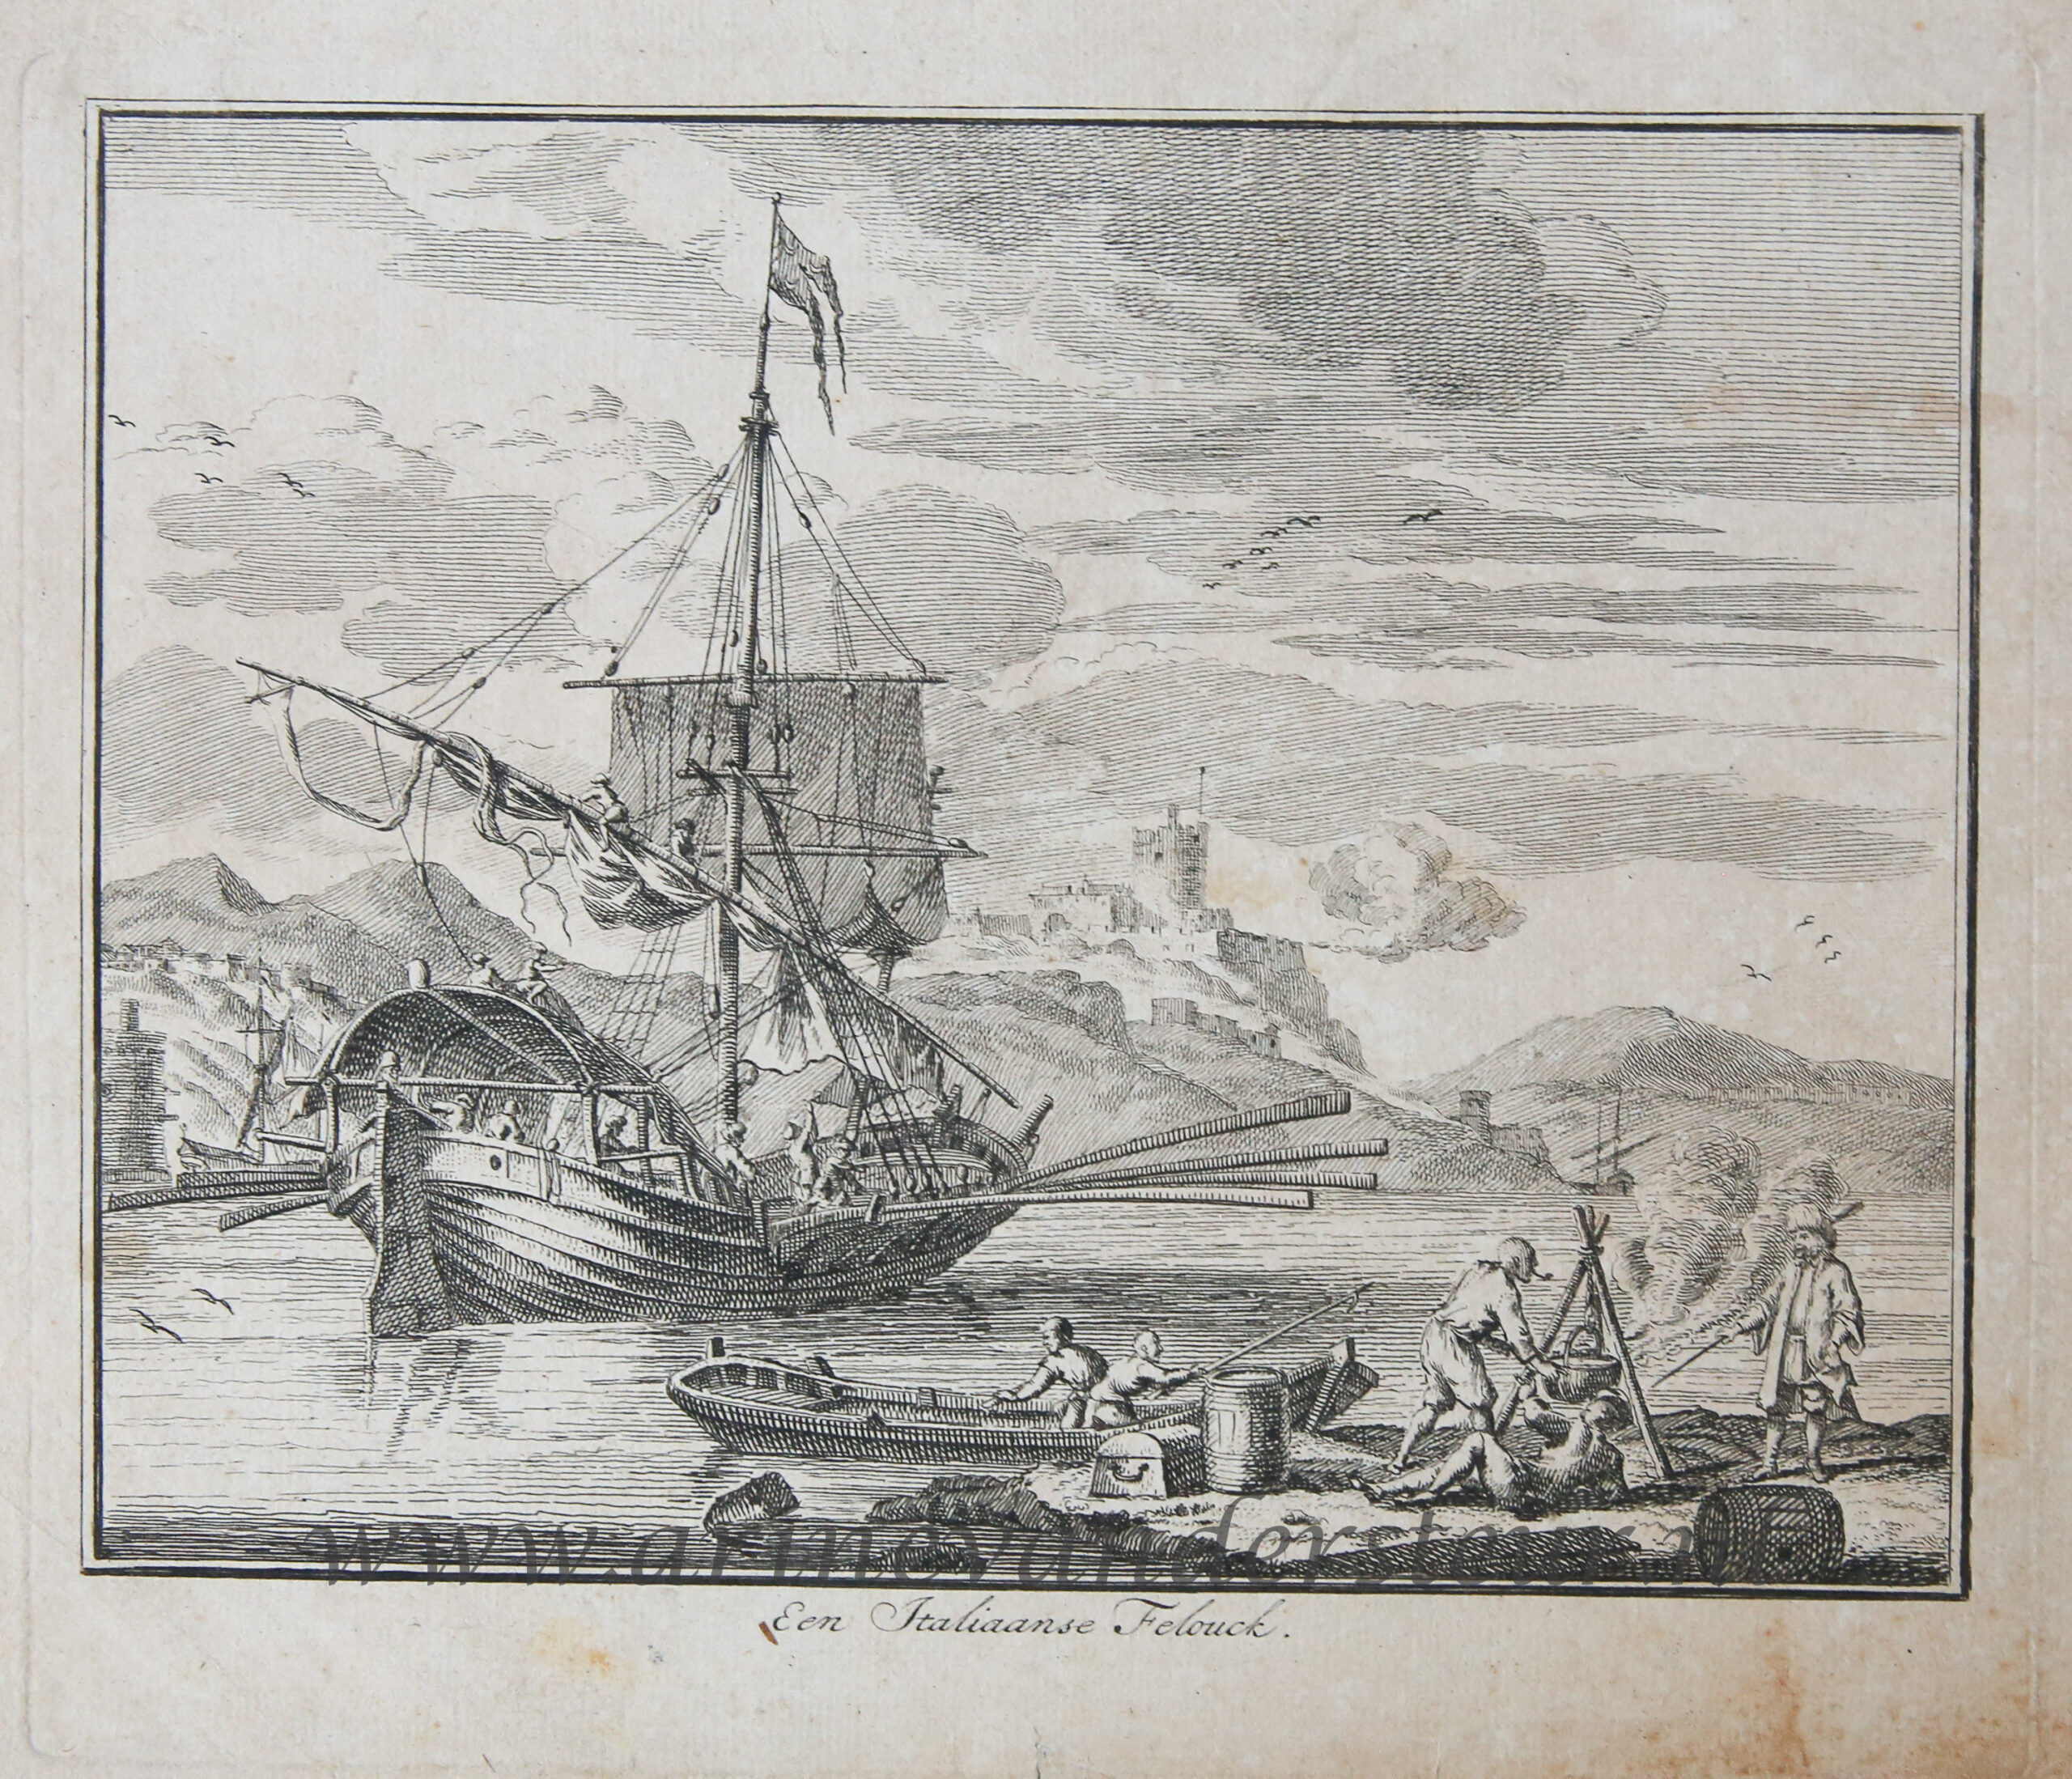 [Antique etching, ets] A.v.d. Laan, Een Italiaanse Felouck, published before 1800.